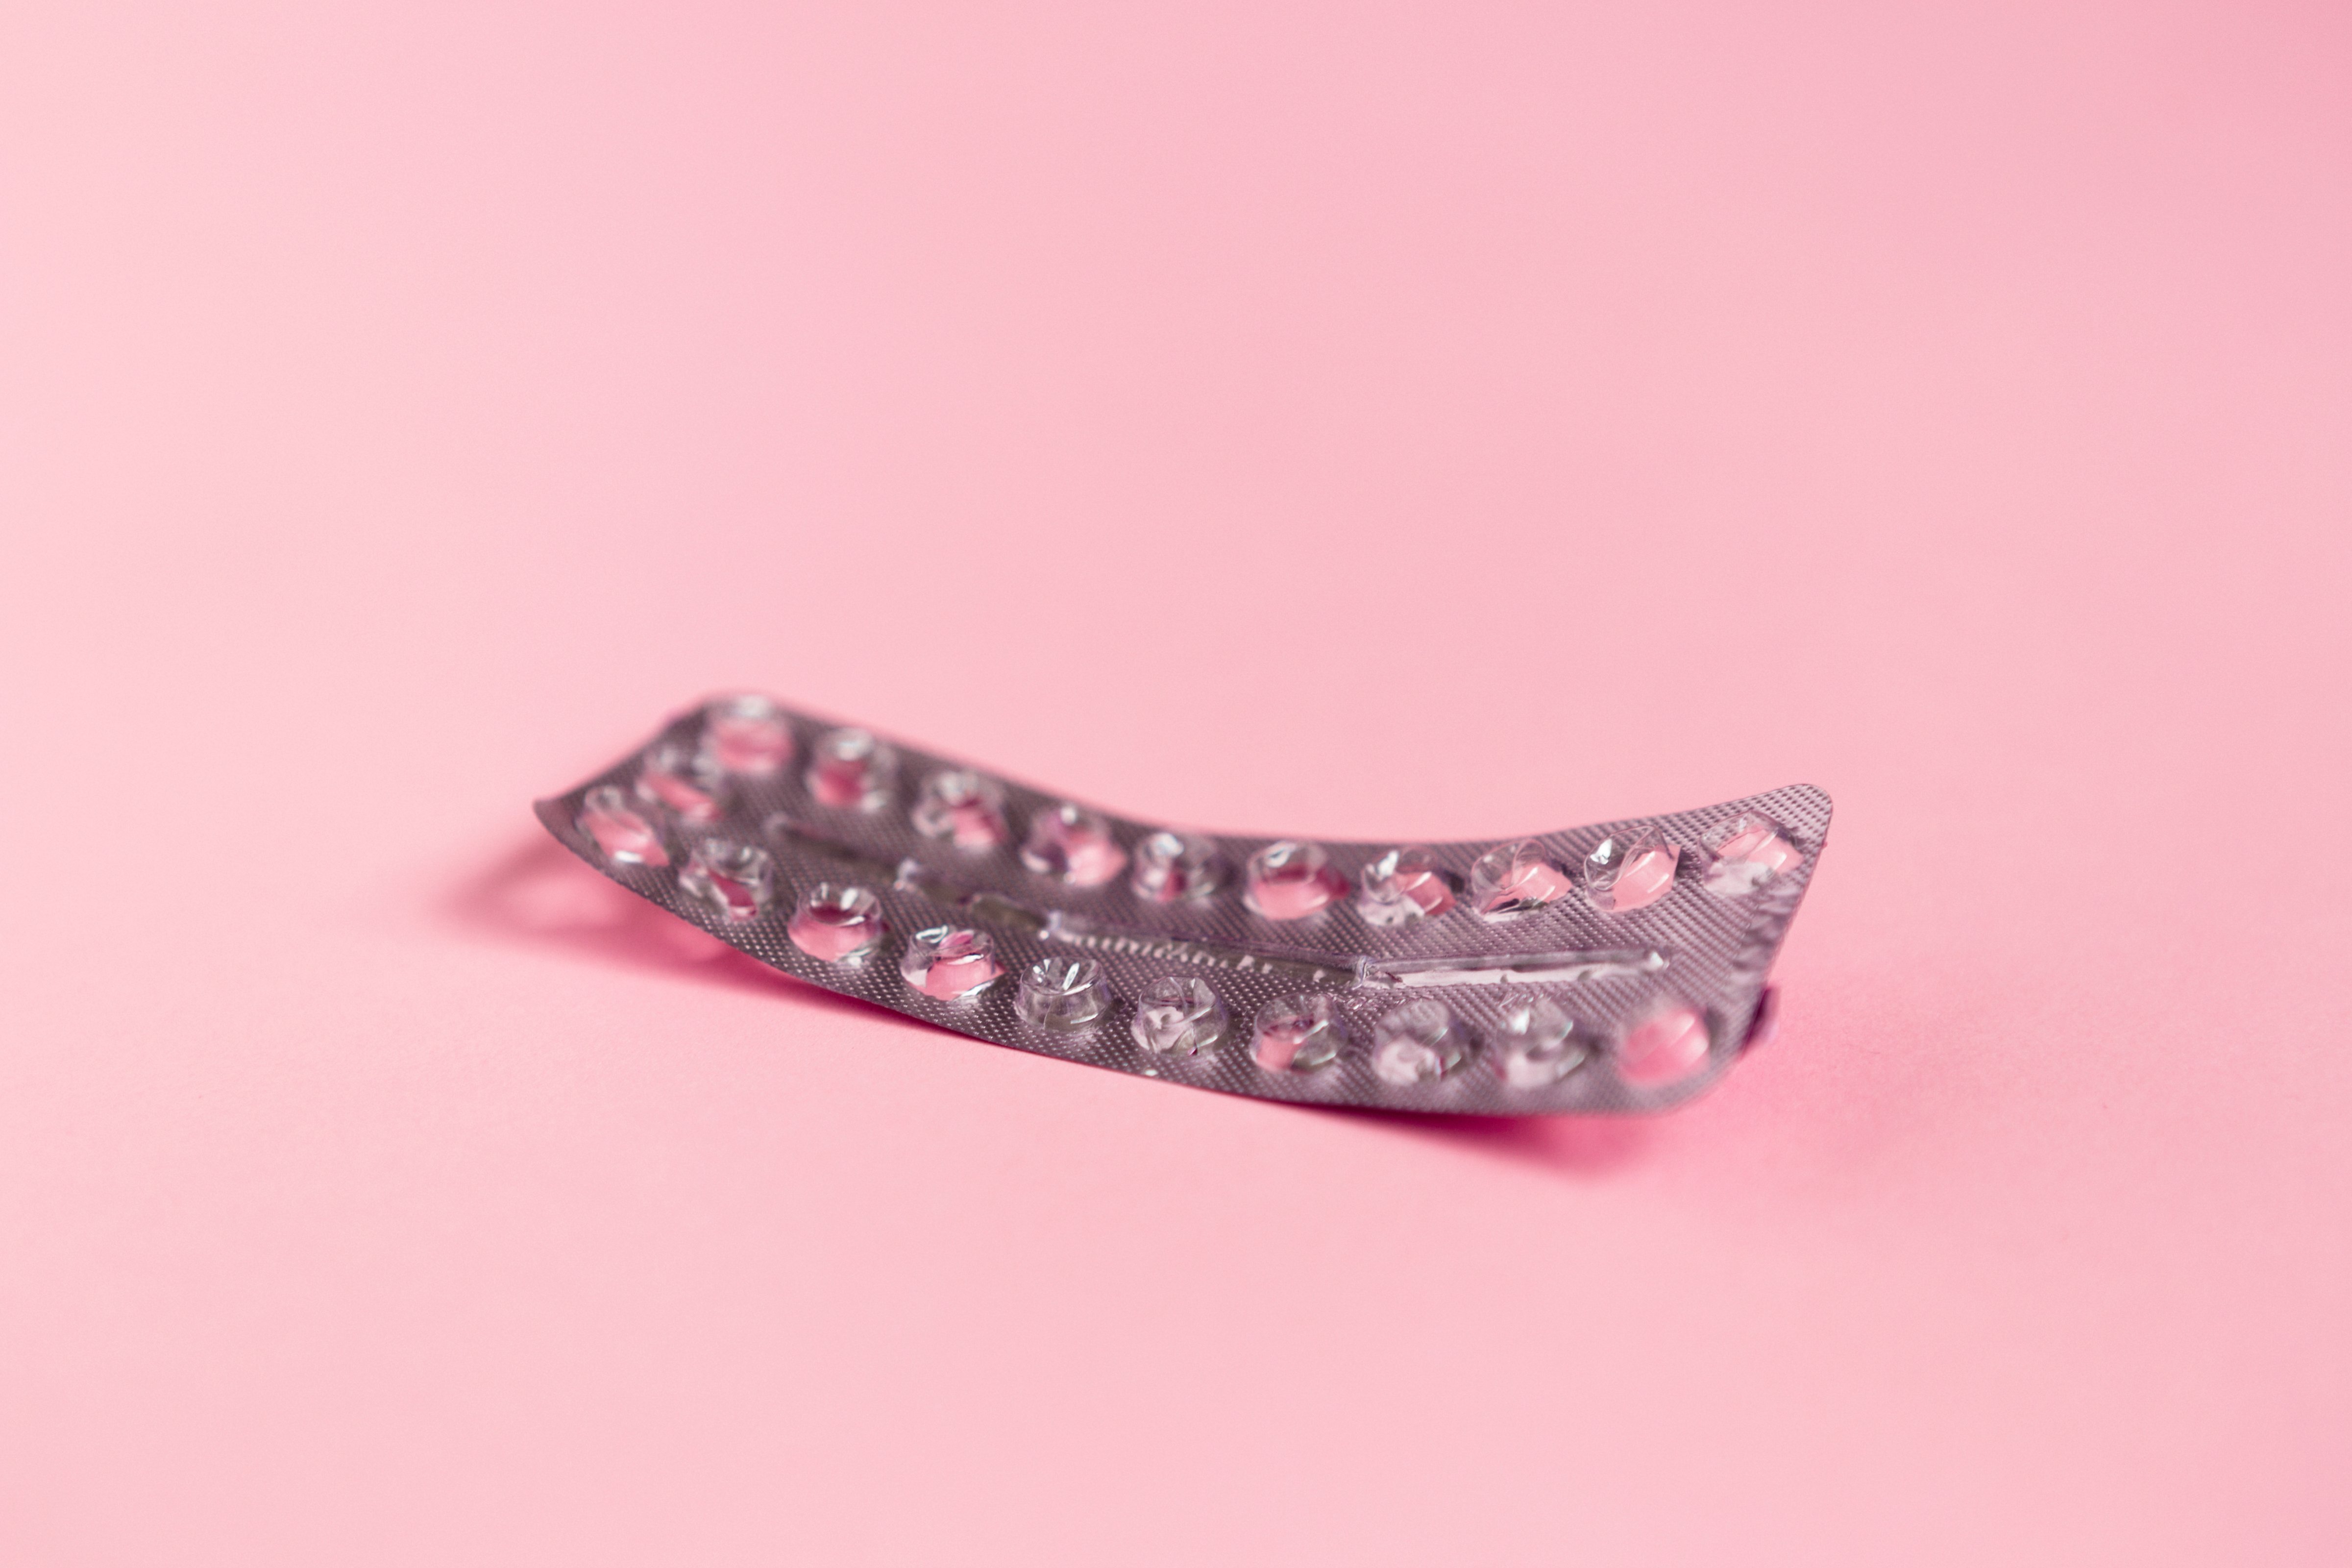 Empty strip of birth control pills on pink background. (Getty Images/iStockphoto)